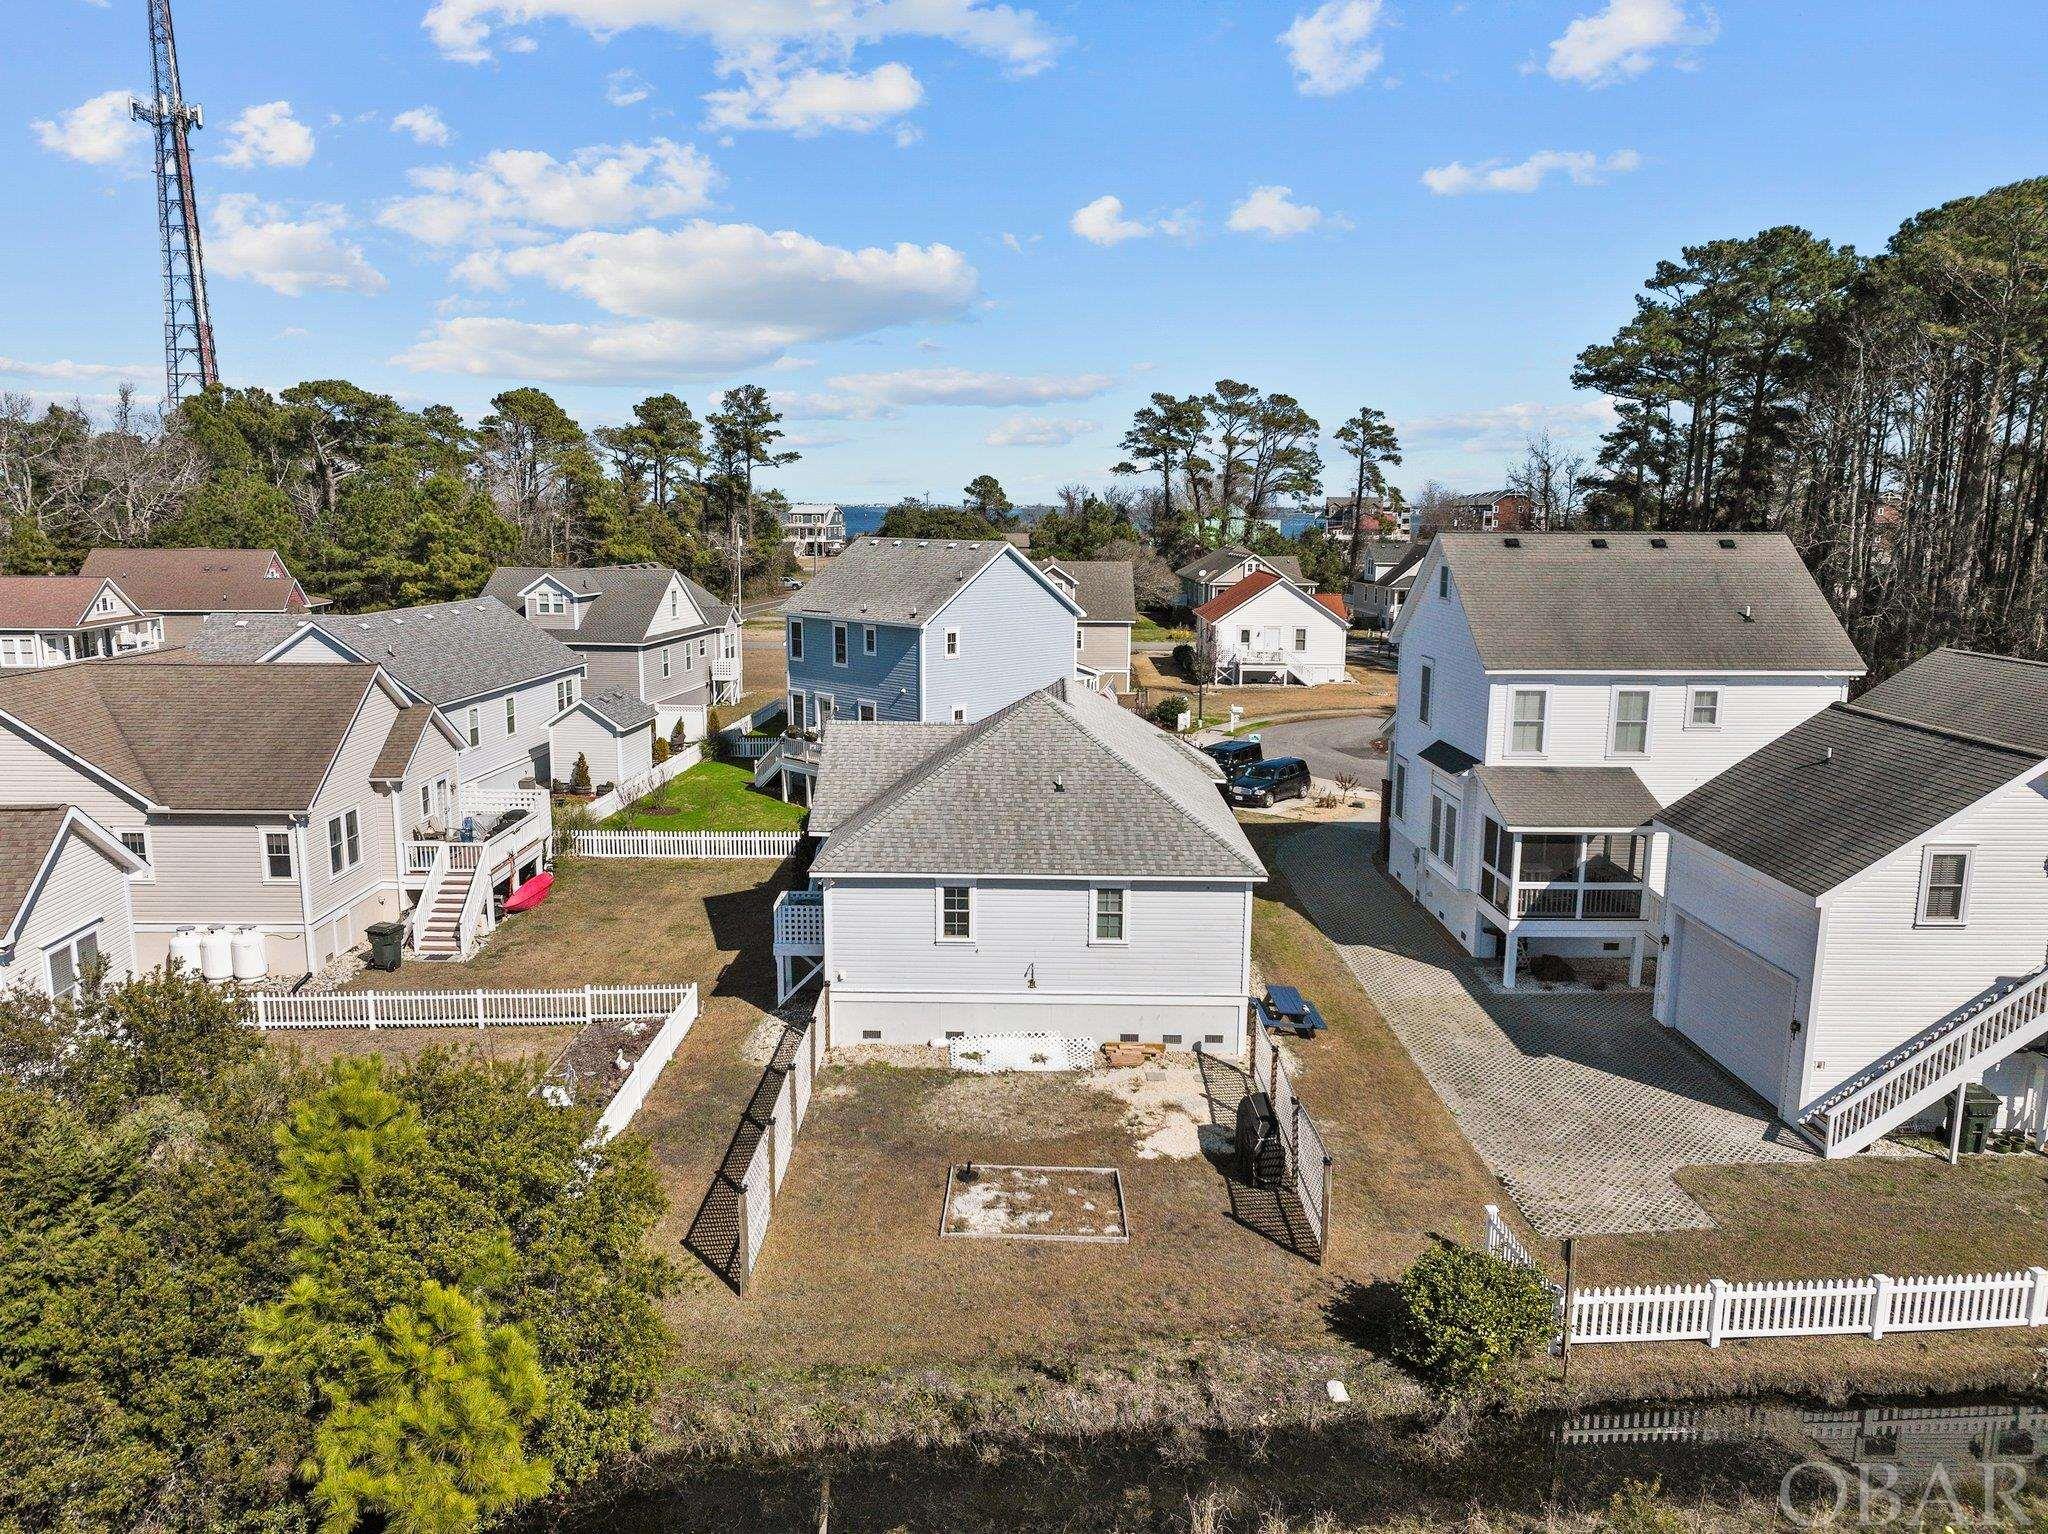 103 Flats Court, Manteo, NC 27954, 3 Bedrooms Bedrooms, ,2 BathroomsBathrooms,Residential,For sale,Flats Court,124682